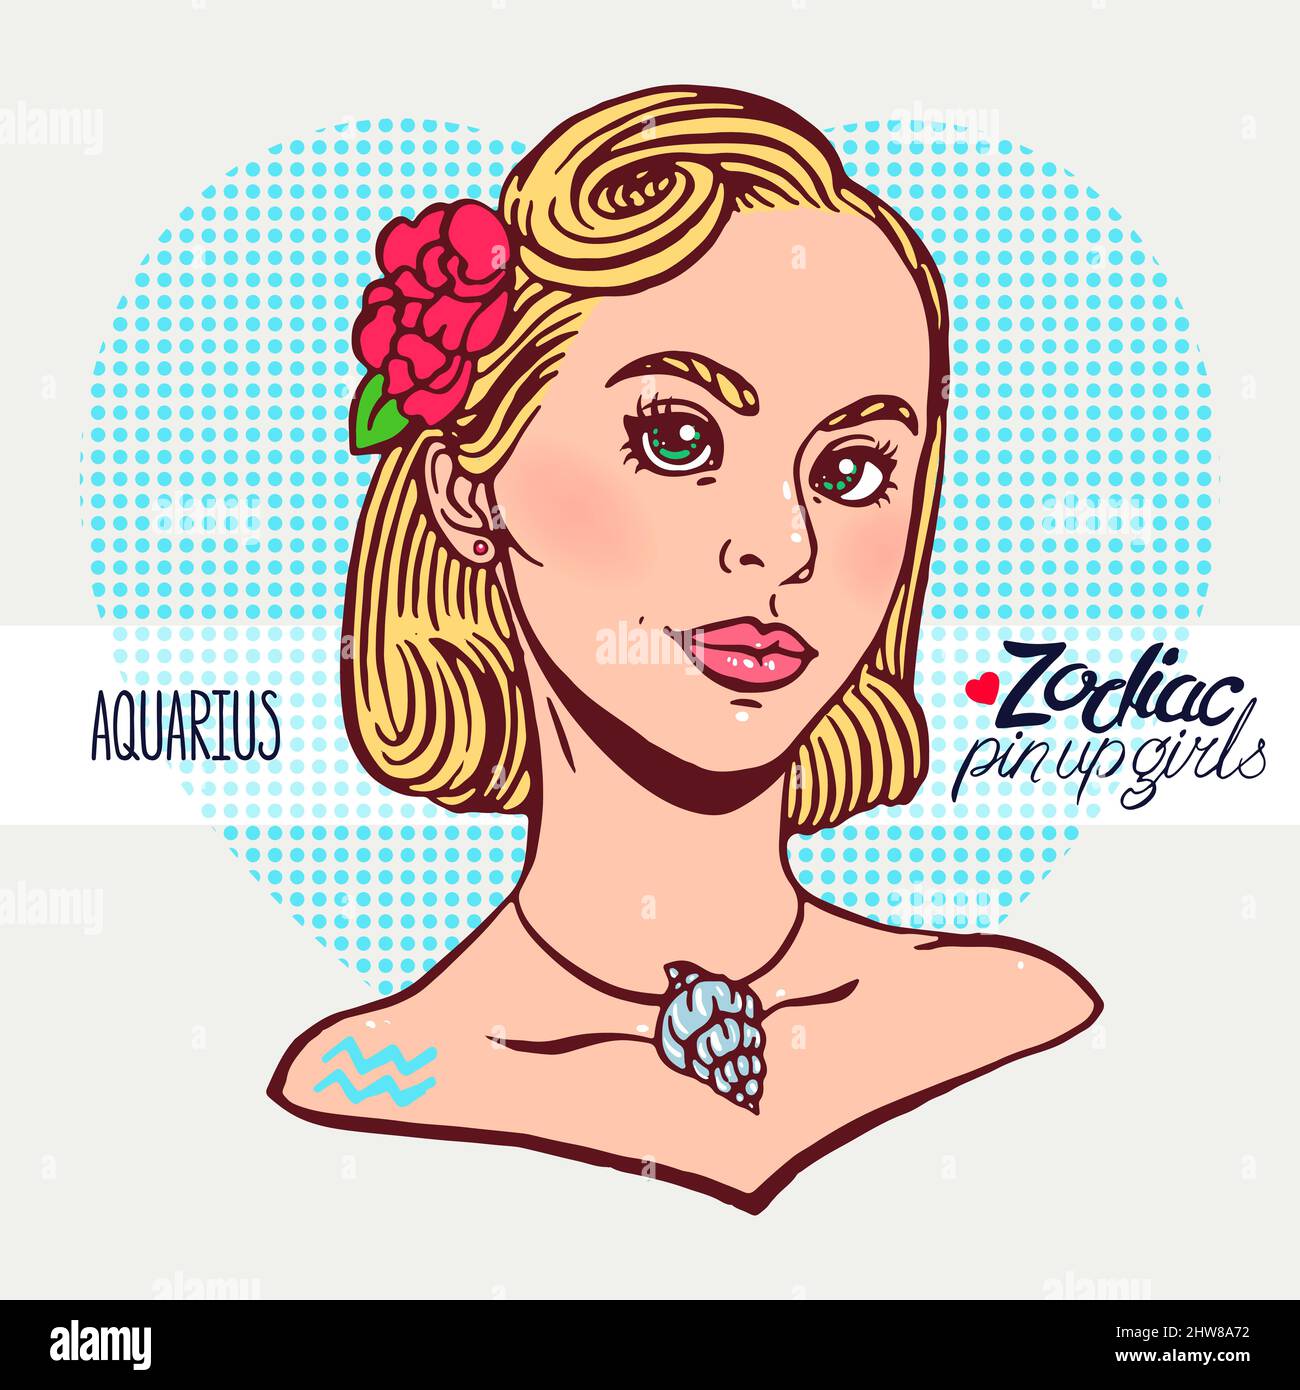 Zodiac signs - Aquarius as a girl in the style of pin-up. Hand-drawn illustration Stock Vector